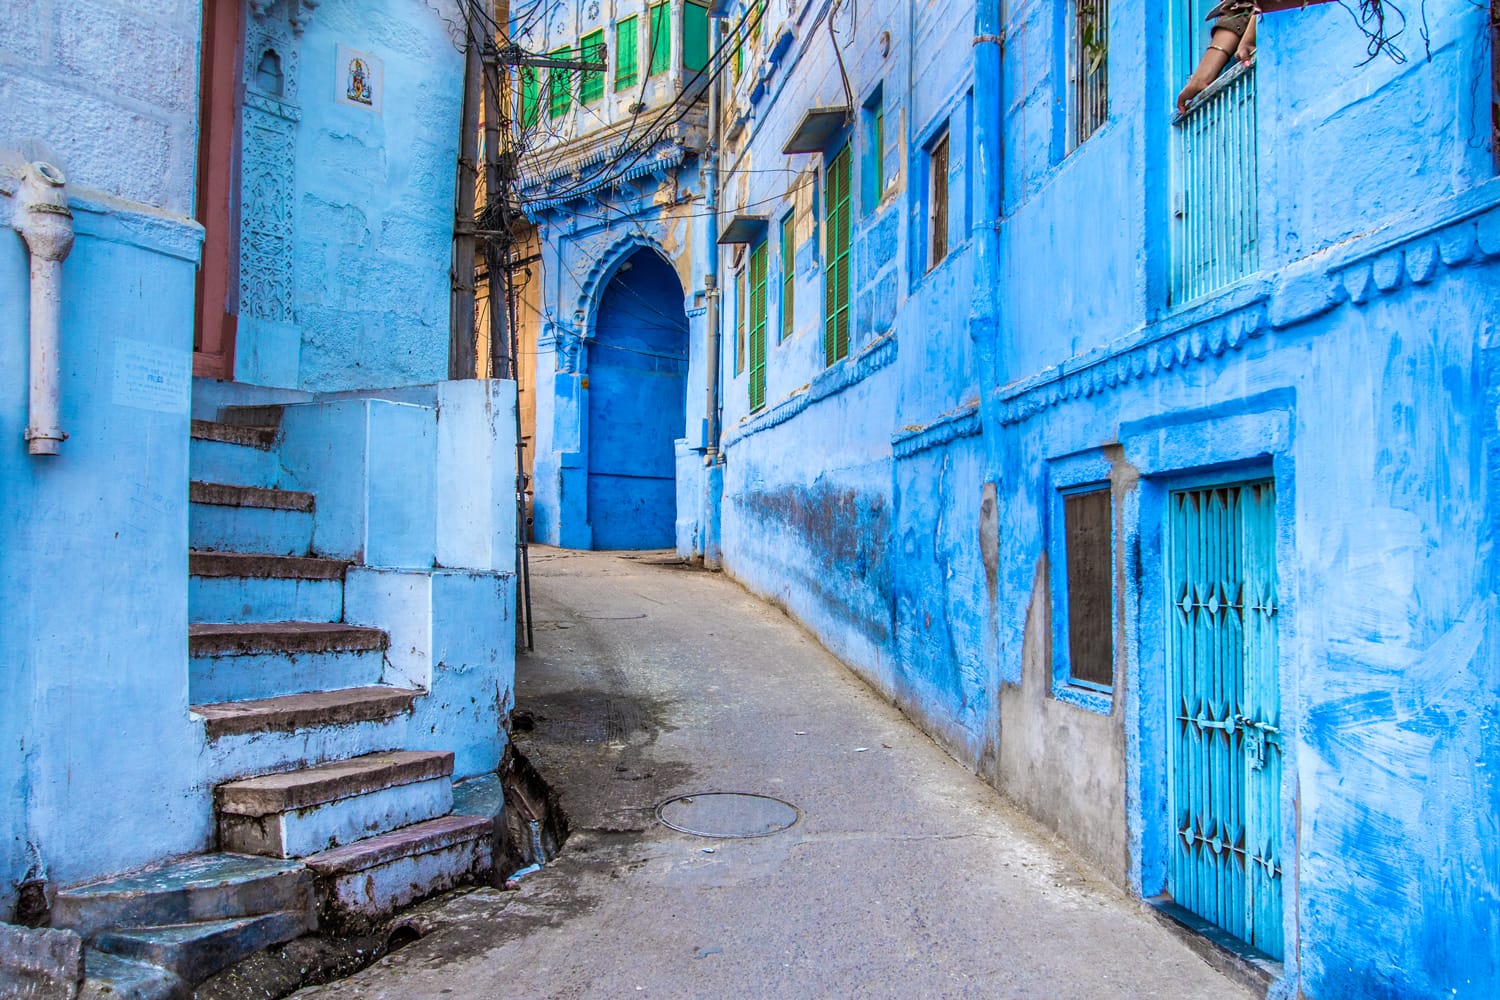 The bright blue streets of the Blue City of Jodhpur, India.